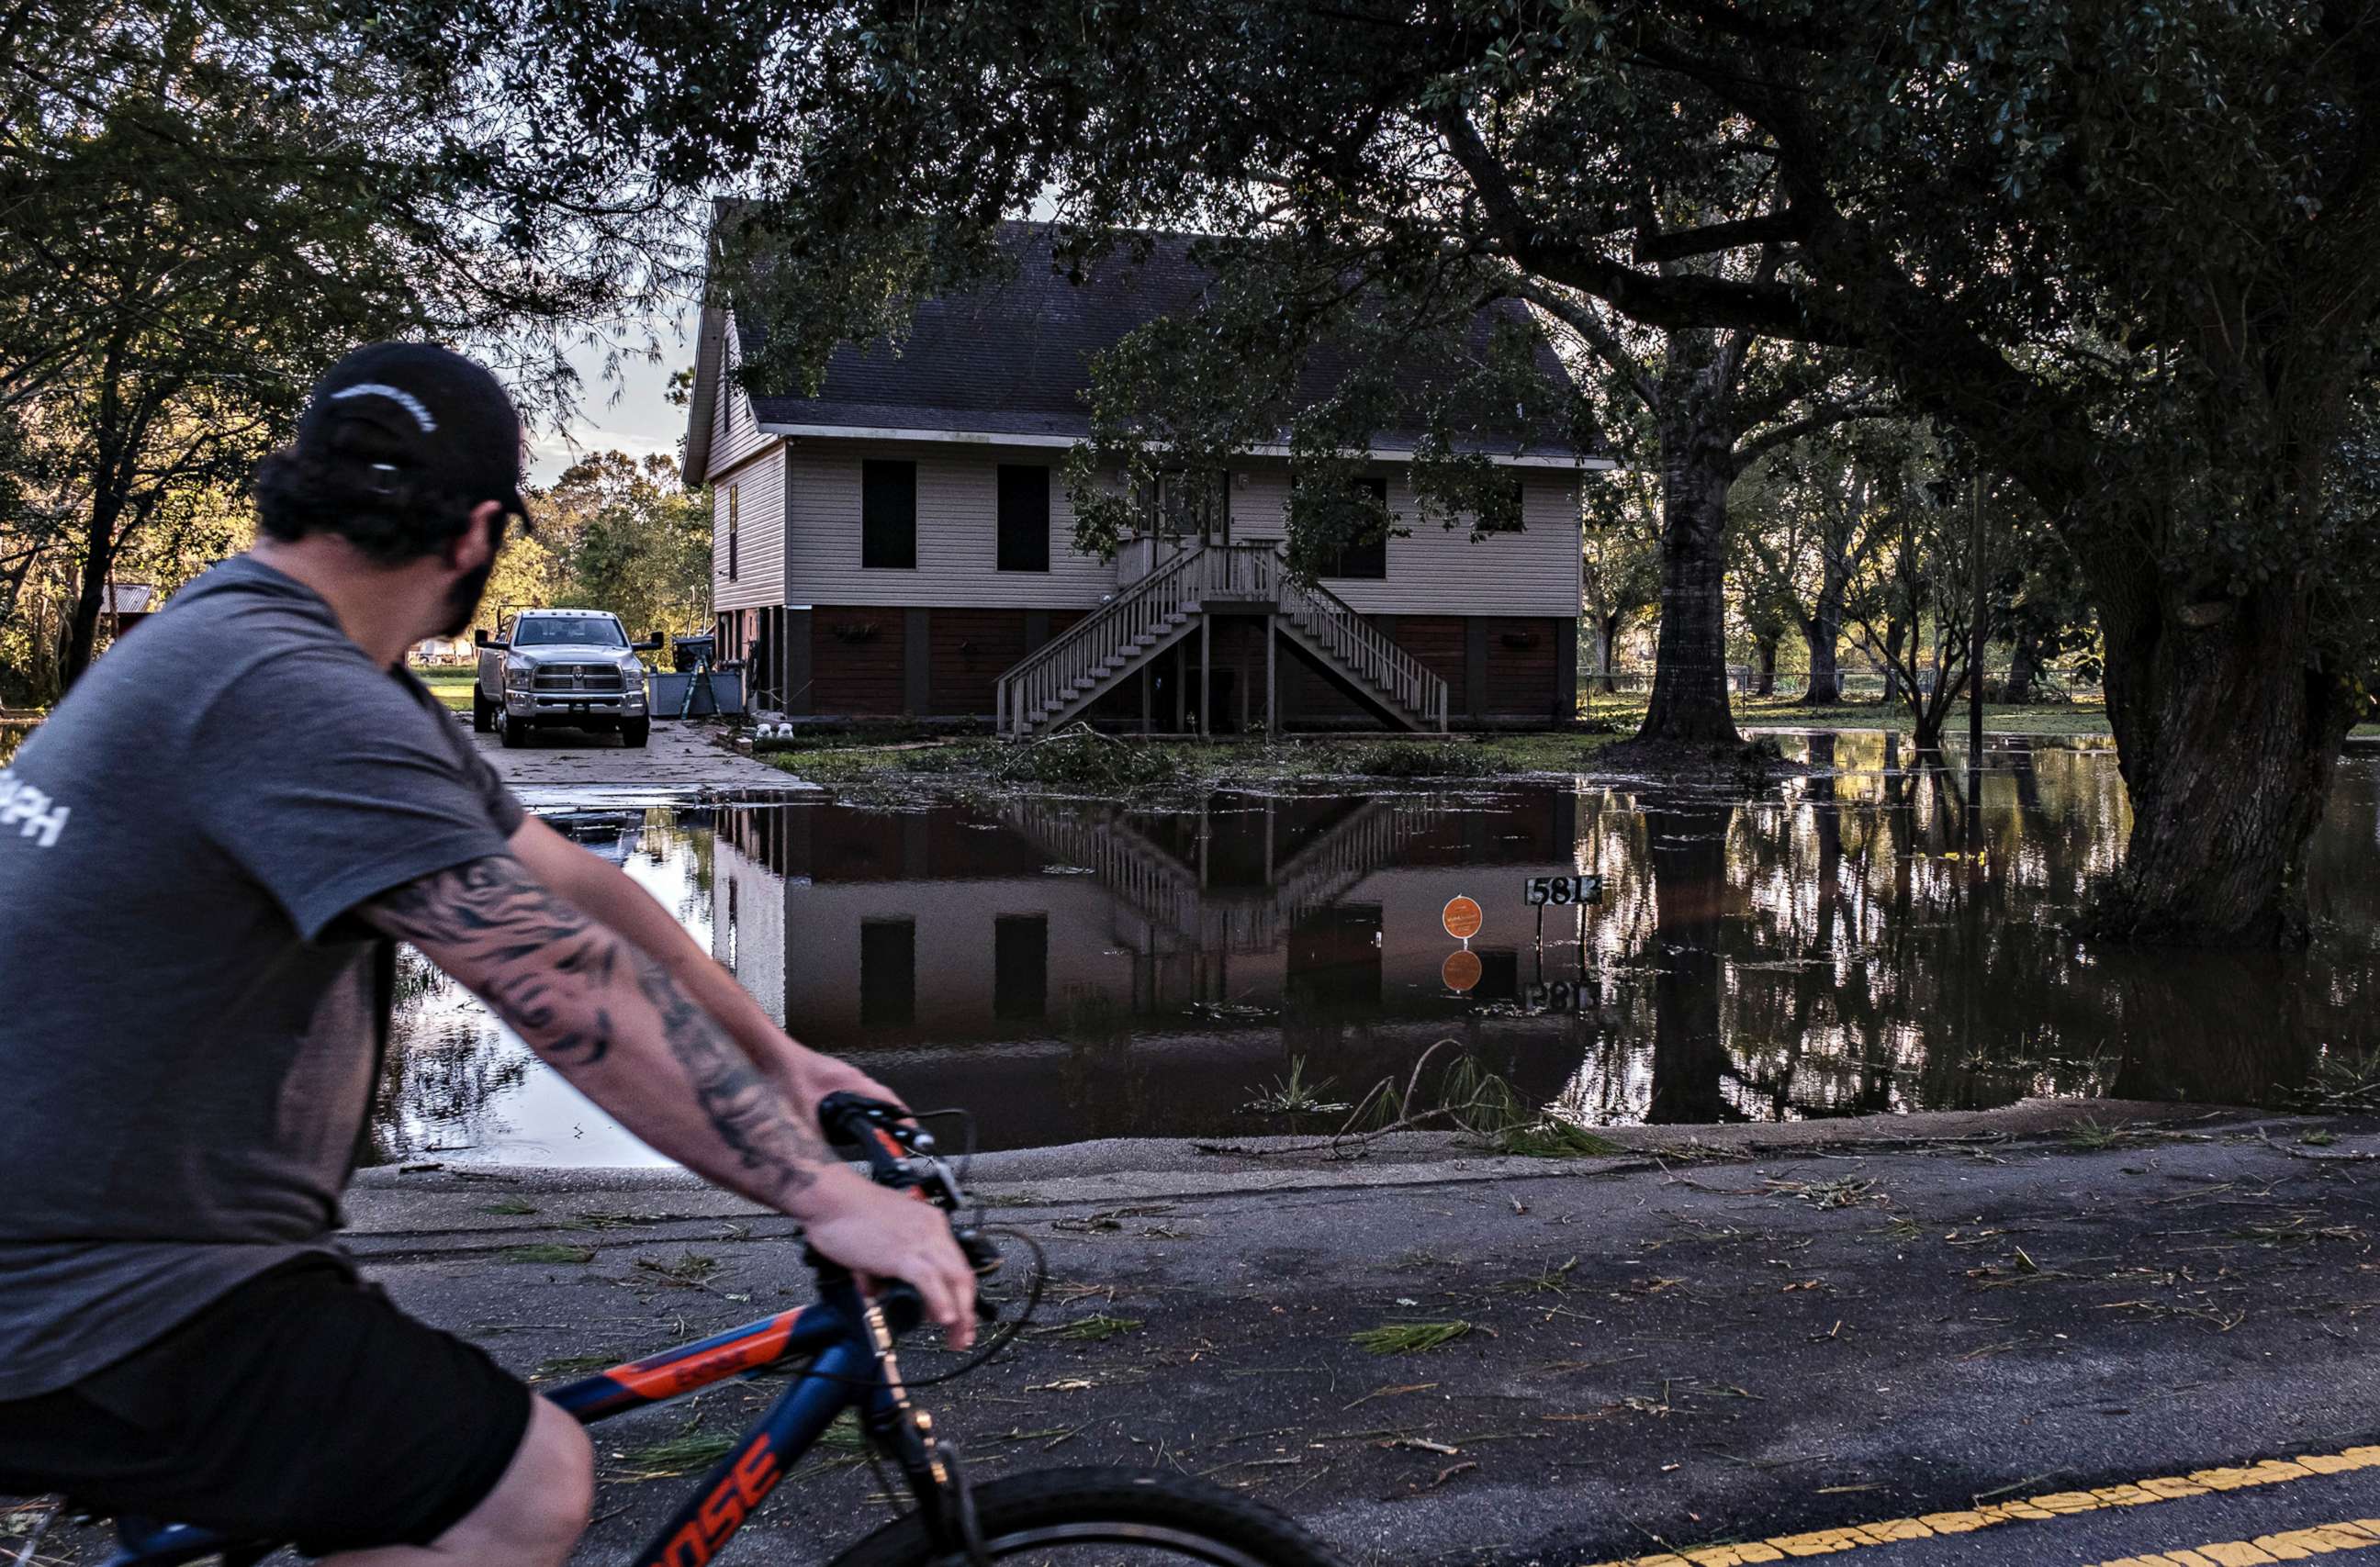 PHOTO: A man rides his bike by a yard flooded from Hurricane Delta in New Iberia, La., Oct. 10, 2020.